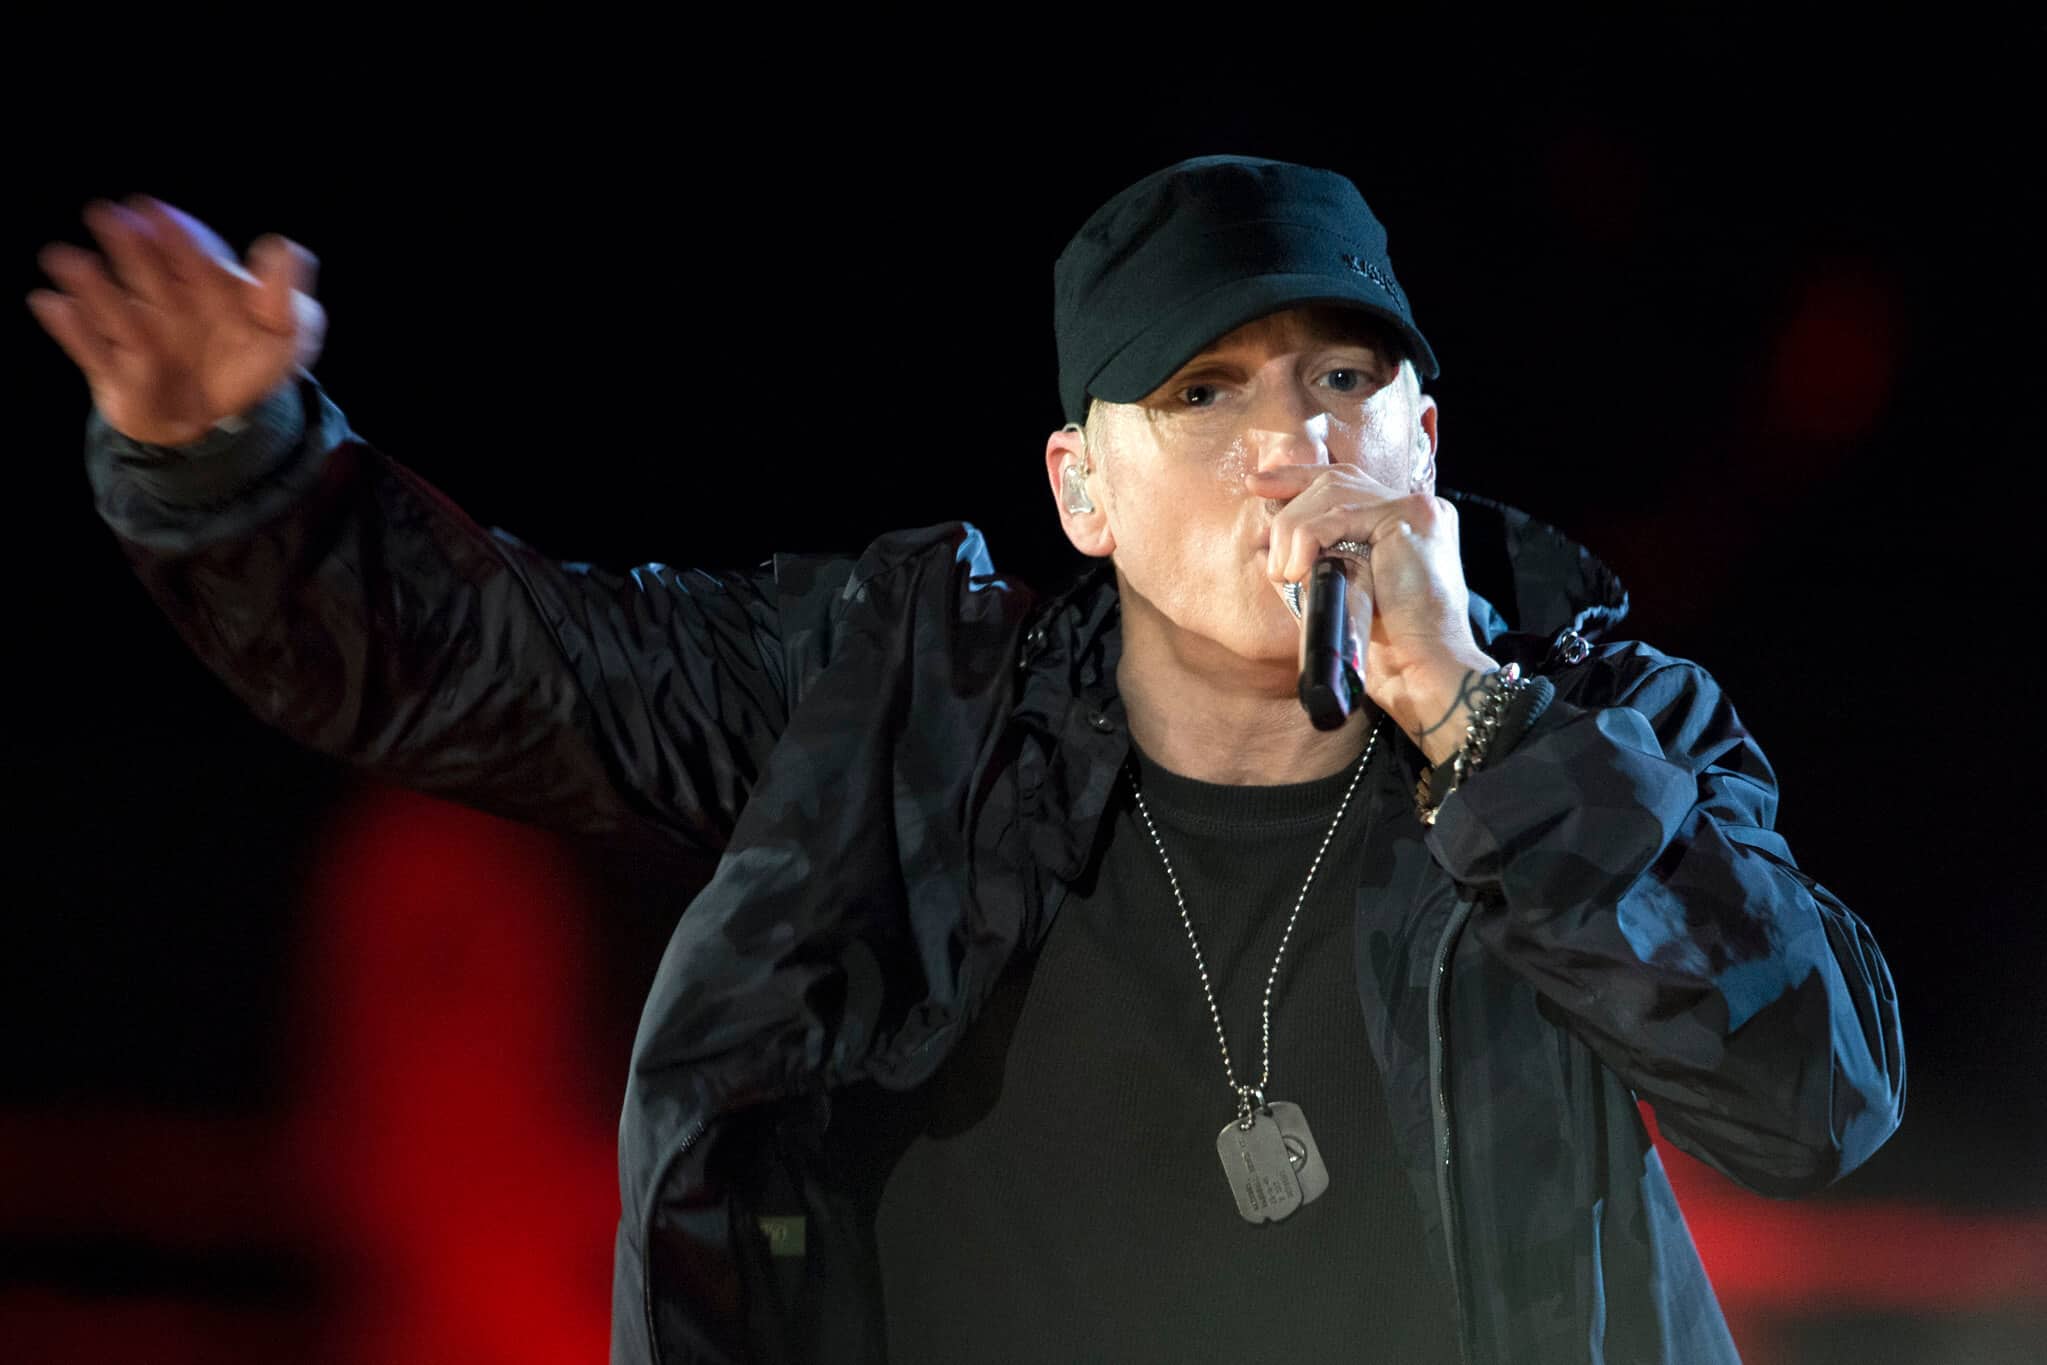 Eminem inducted into Rock & Roll Hall of Fame by Dr. Dre at 2022 ceremony